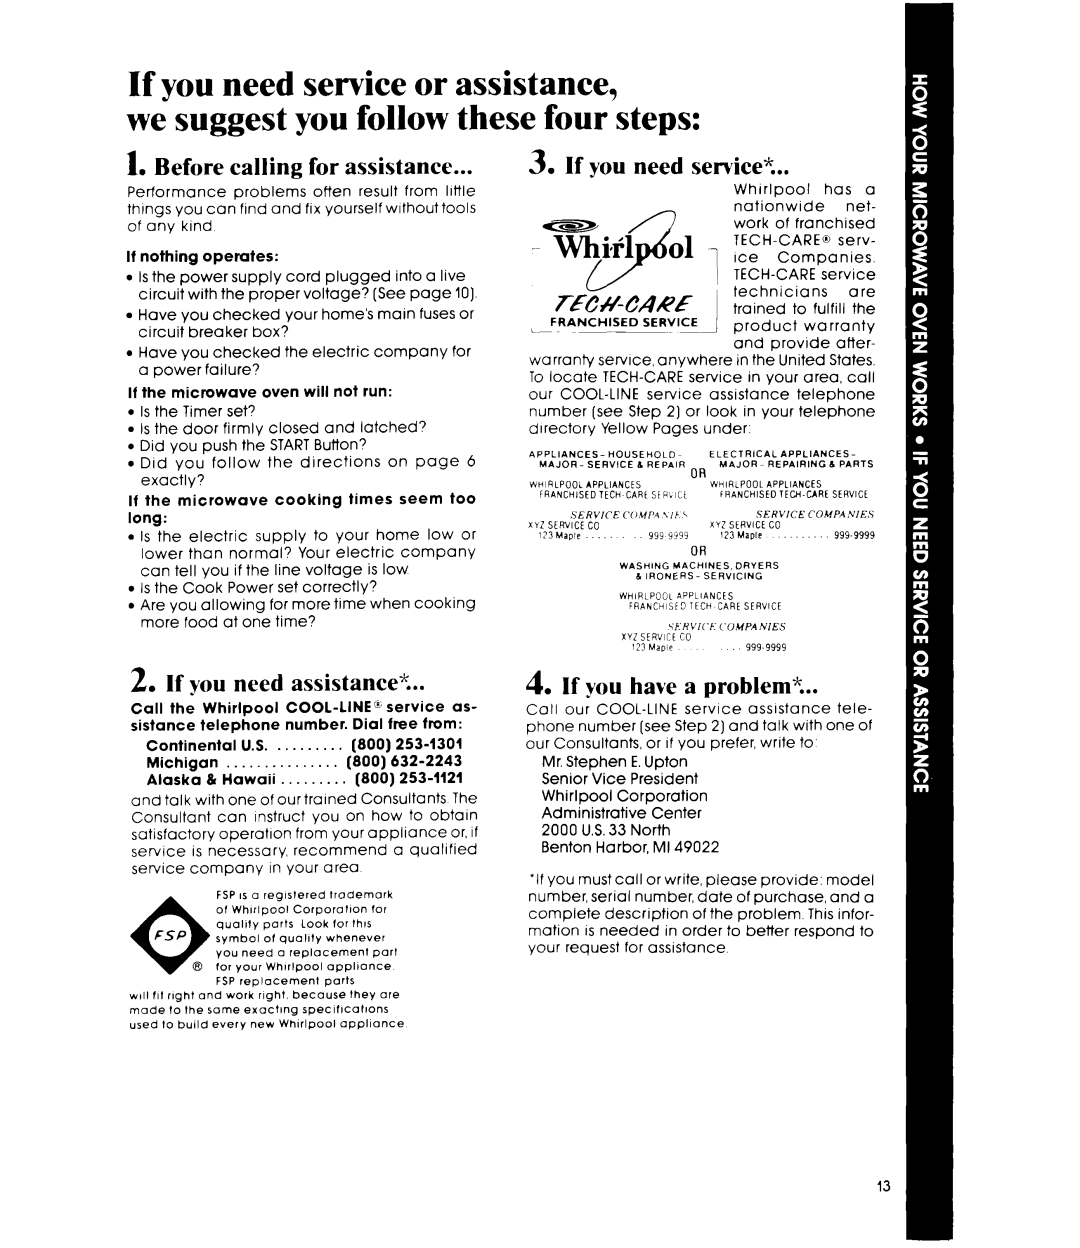 Whirlpool MW8200XR manual If you need service or assistance, we suggest you follow these four steps, If you need service% 